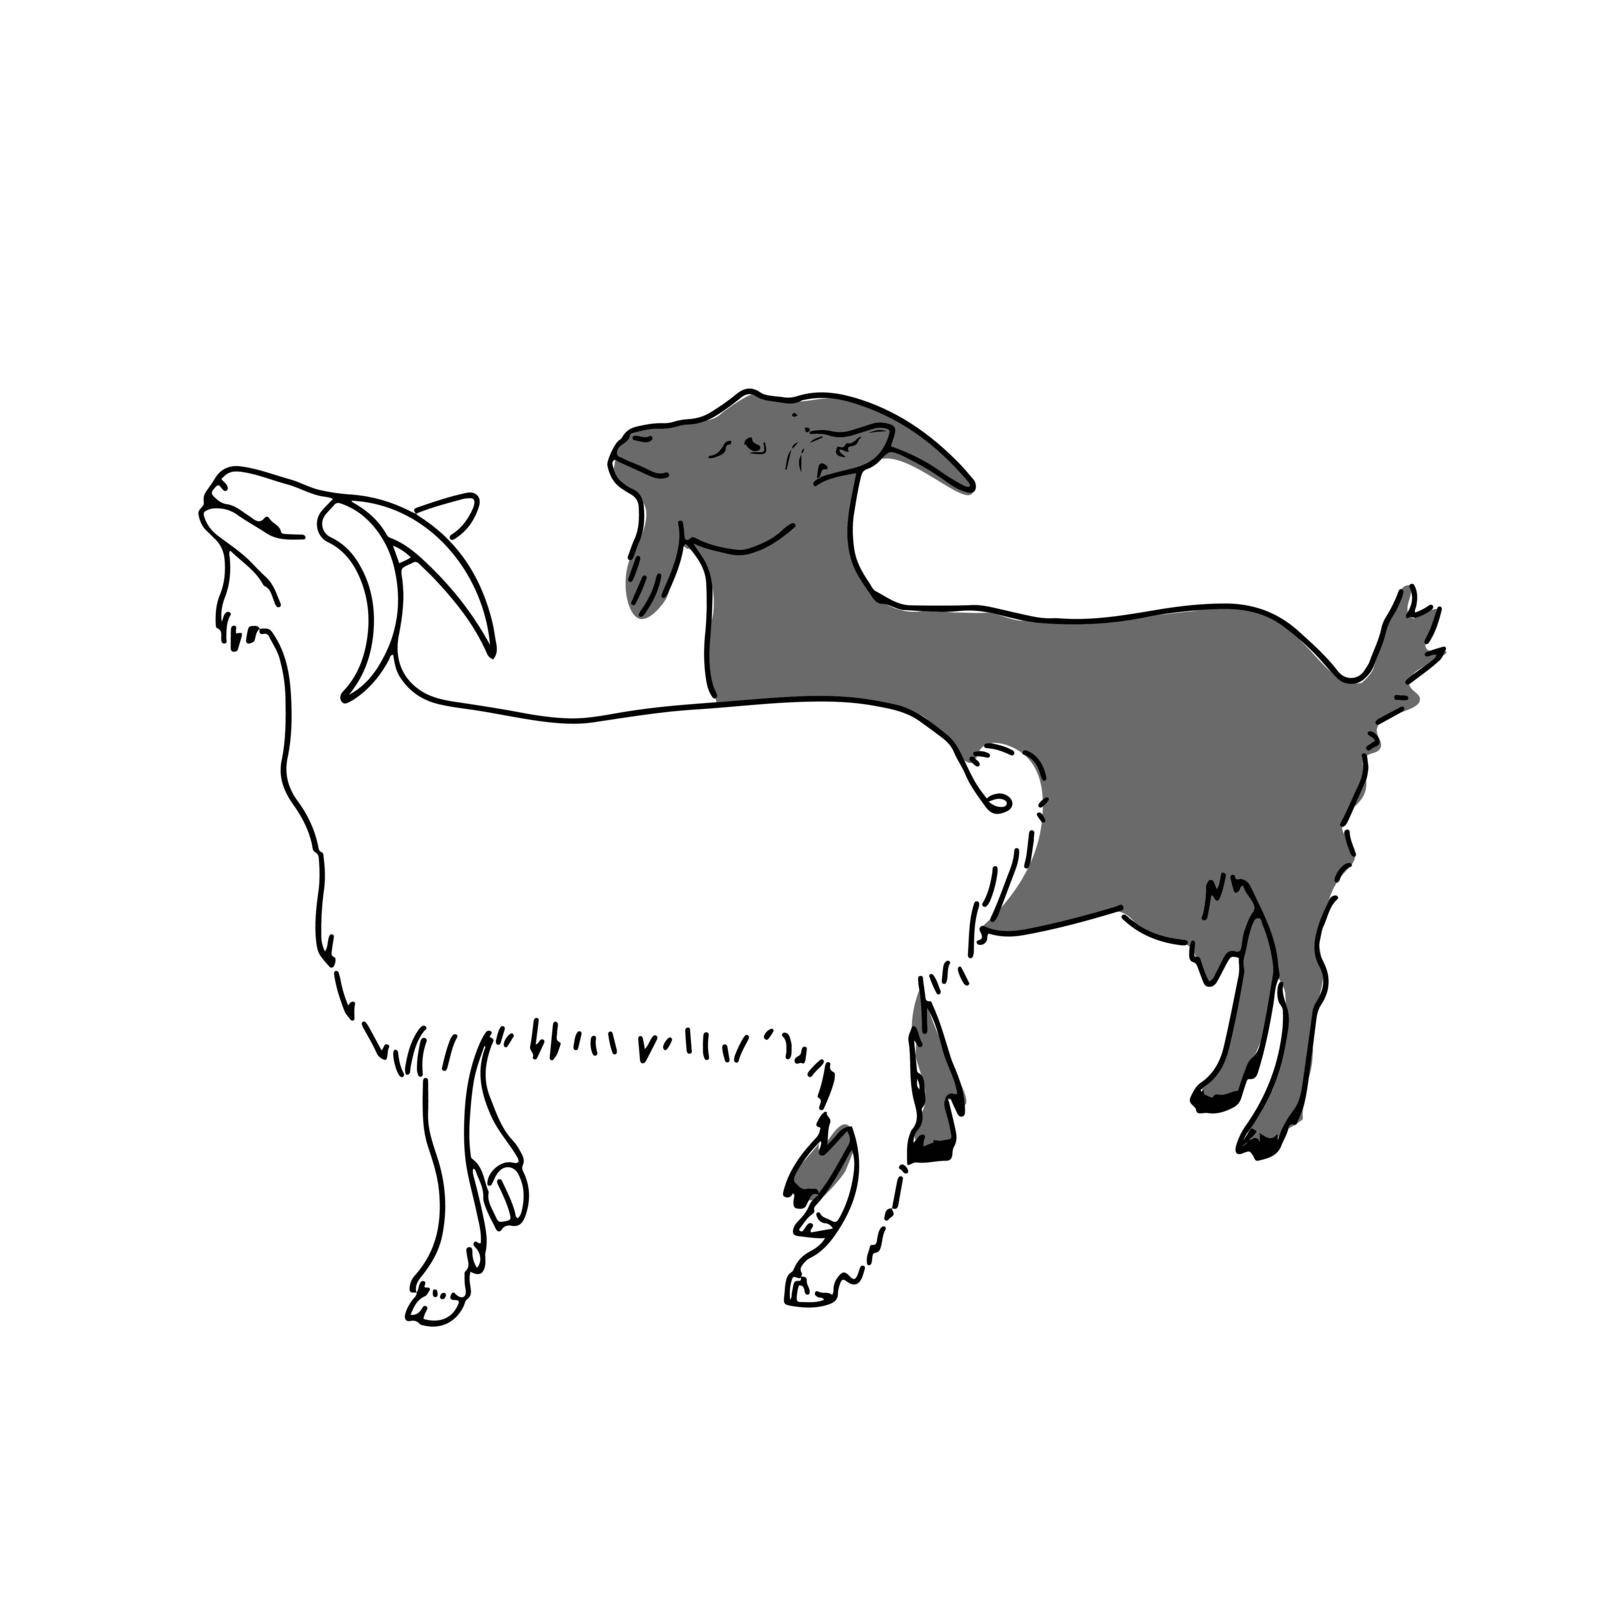 Domestic goats, goat farm logo. For use in advertising a goat farm.